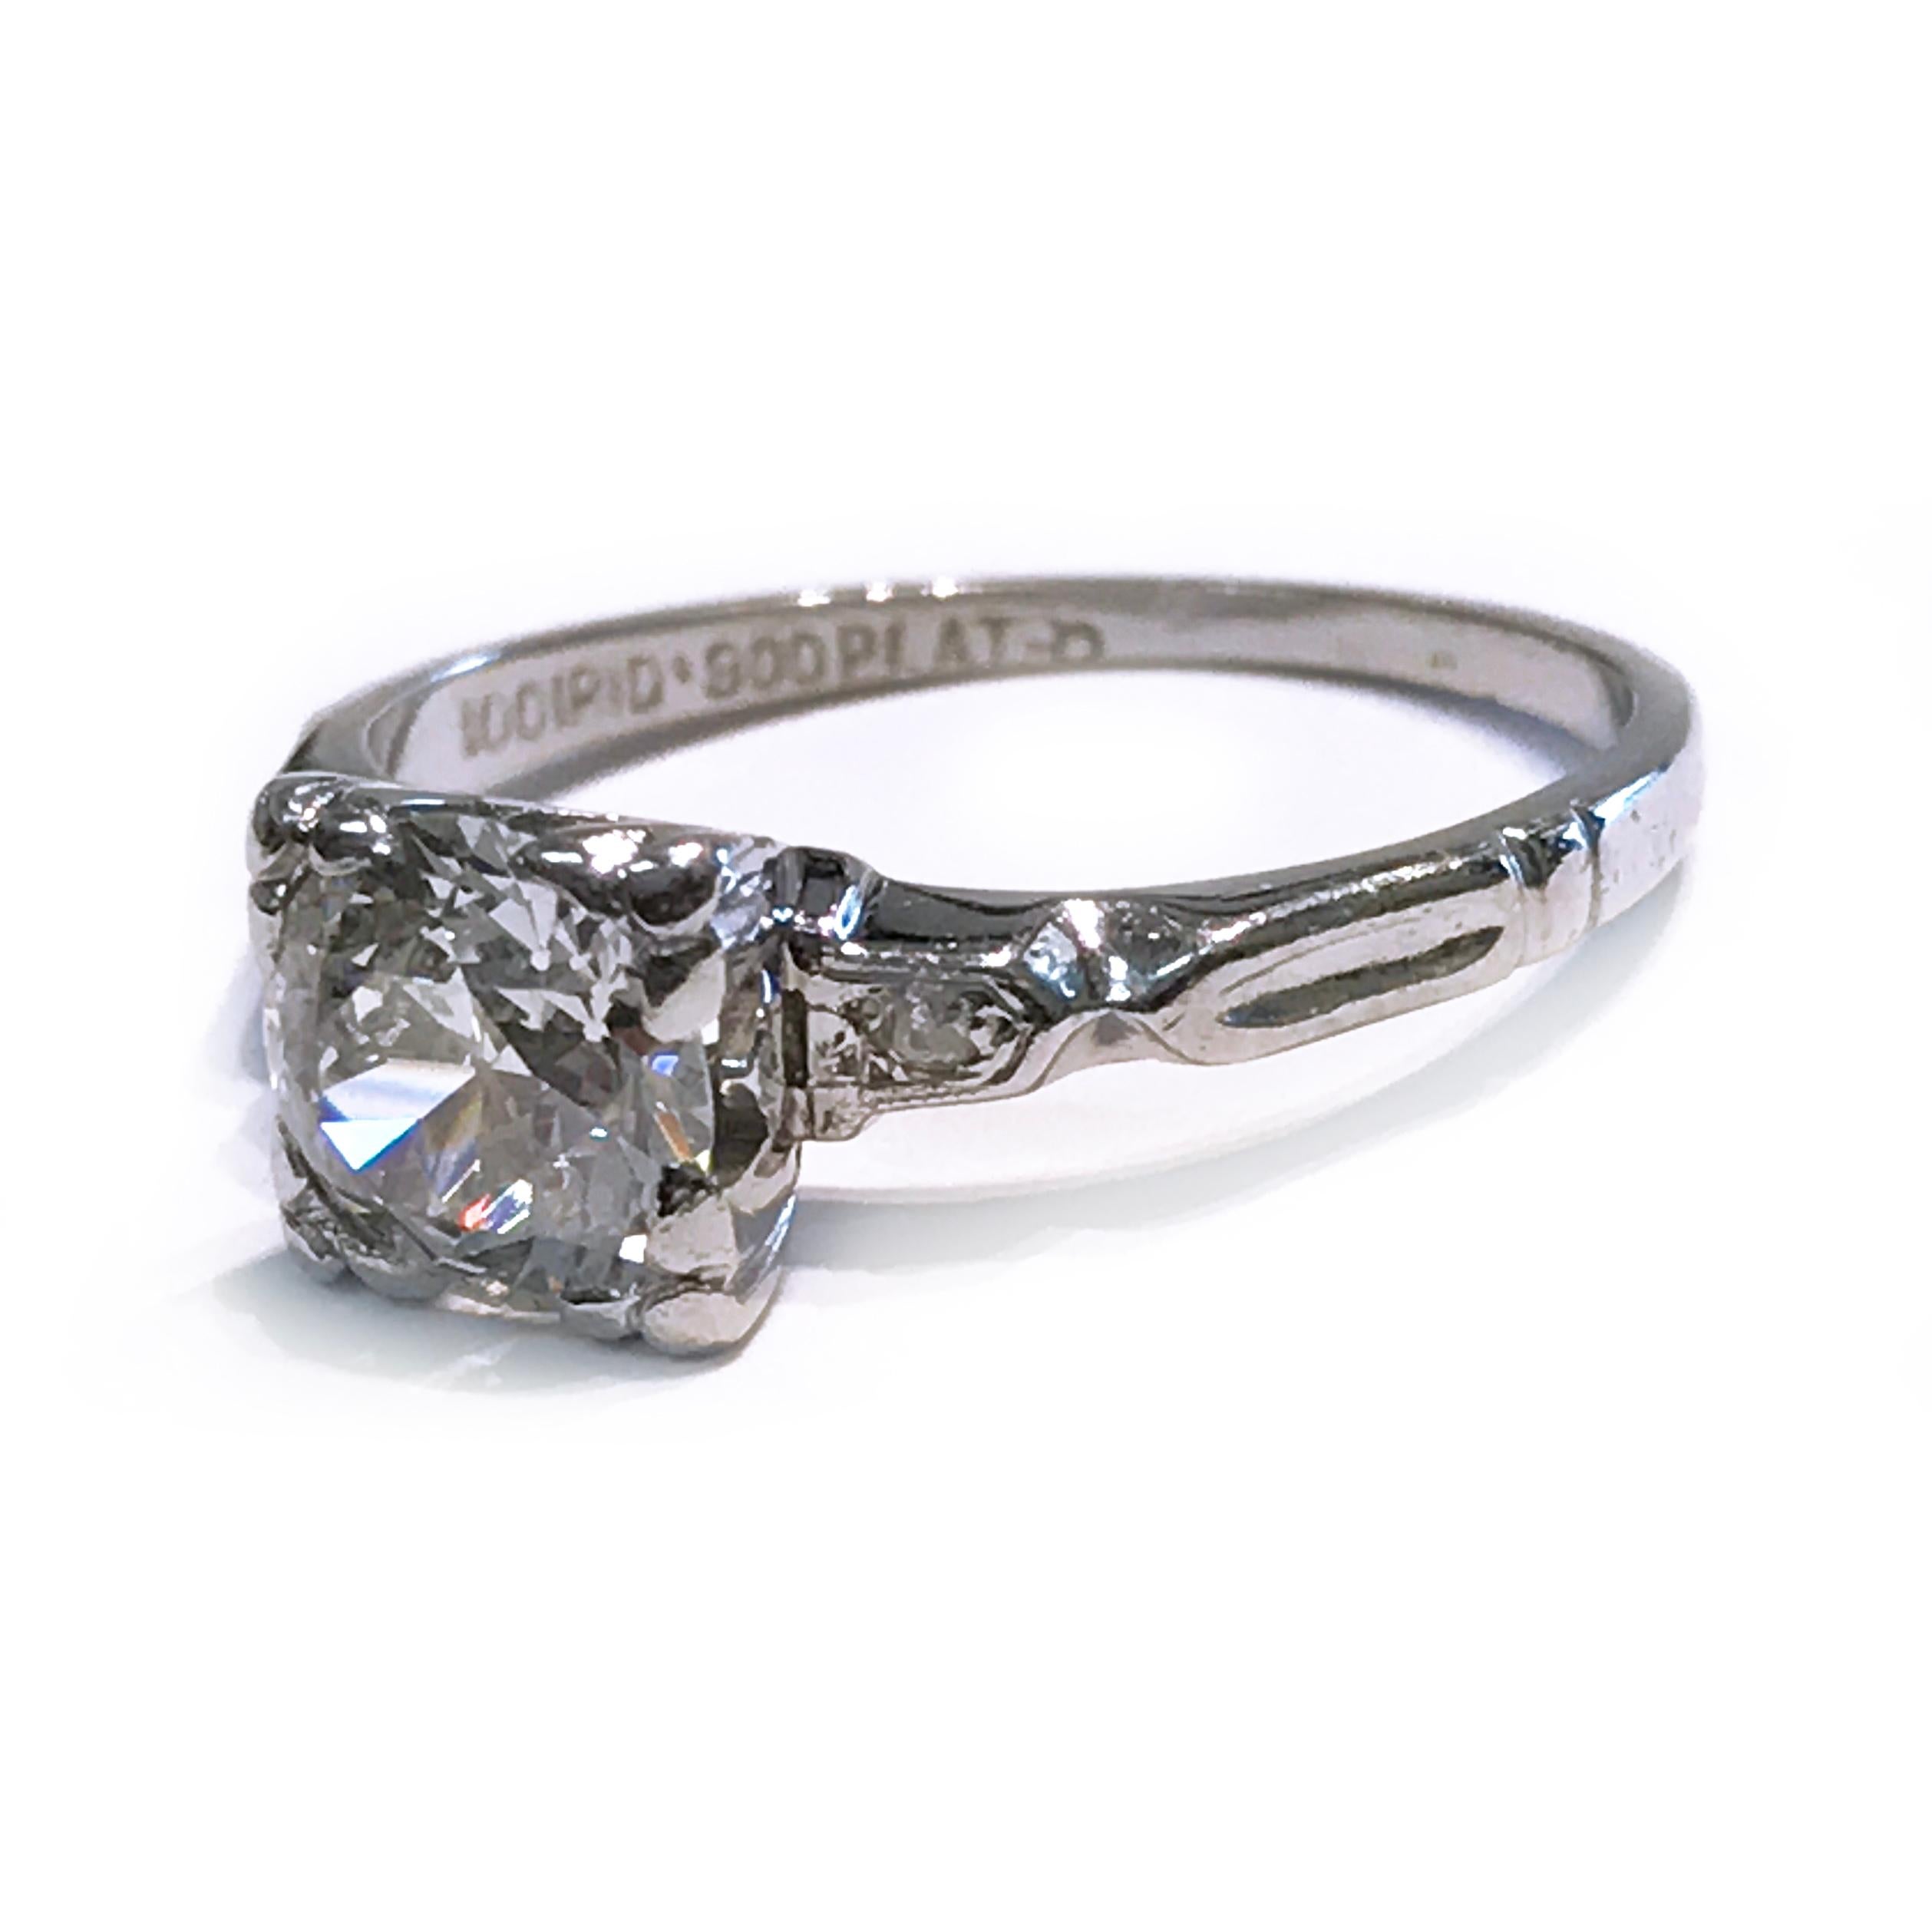 Vintage 1 Carat Diamond Platinum Engagement Ring. The Center Diamond measures 6.5mm x 6.64mm x 3.55mm and has a carat weight of 1.00 carat. The Diamond is VS2 (G.I.A.) in clarity and G-H (G.I.A.) in color. Two accent diamonds flank either side of